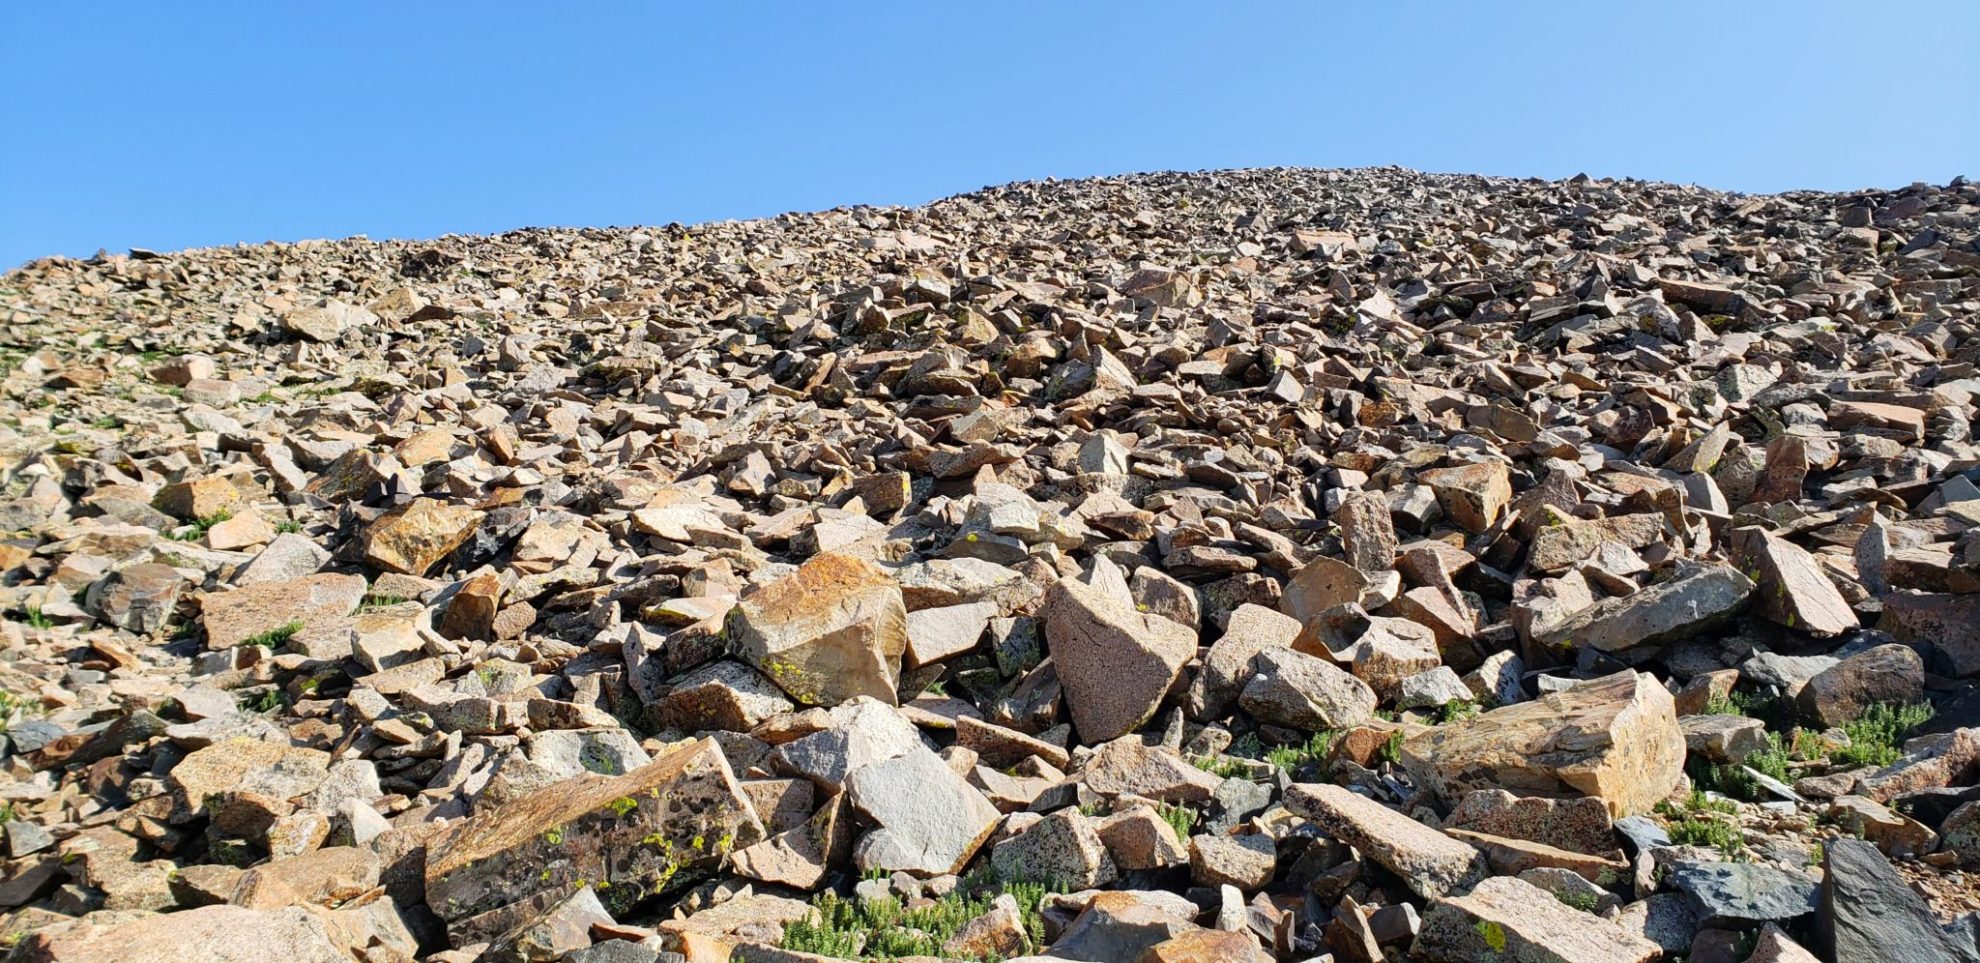 The final push to the summit over heavy talus